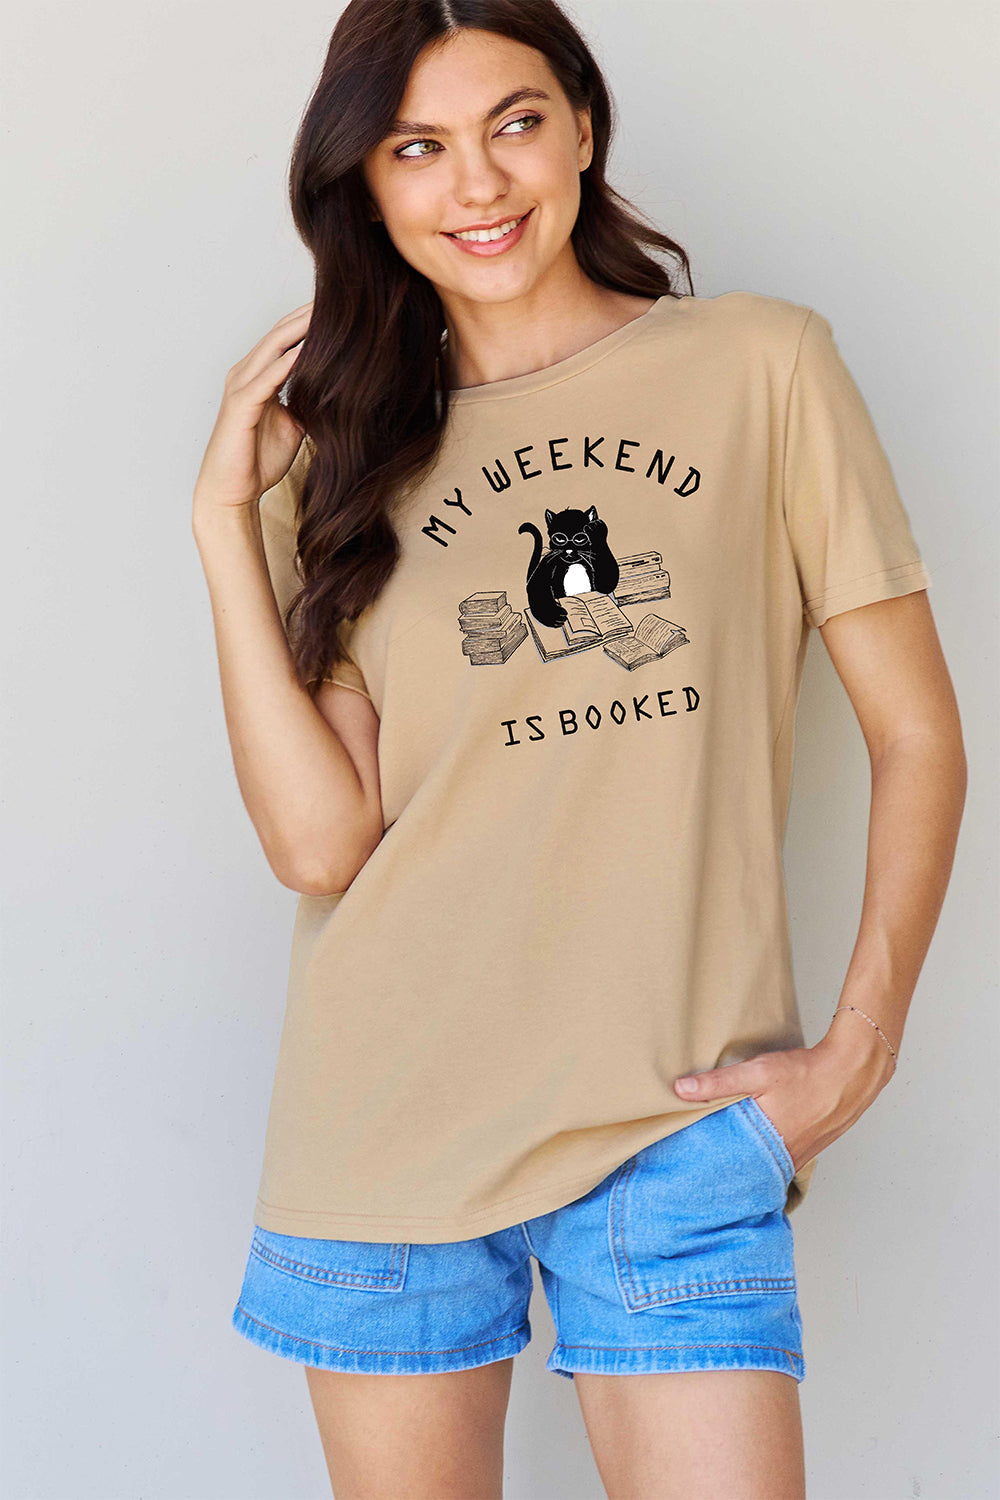 Full Size MY WEEKEND IS BOOKED Graphic T-Shirt - Khaki / S - T-Shirts - Shirts & Tops - 6 - 2024